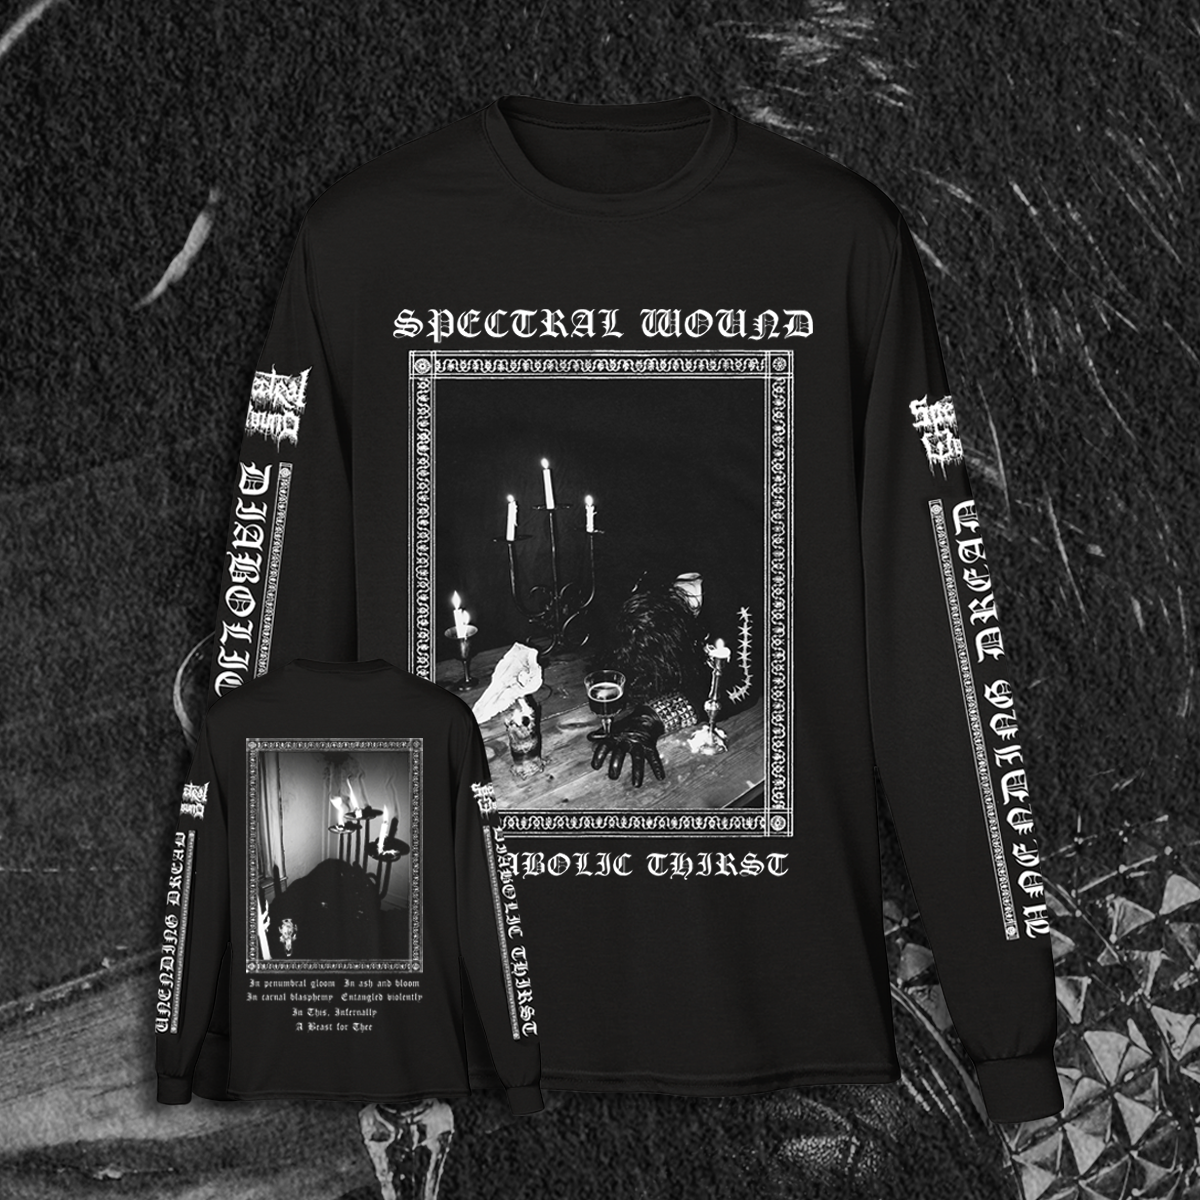 SPECTRAL WOUND "A DIABOLIC THIRST" LONG SLEEVE SHIRT (PRE-ORDER)